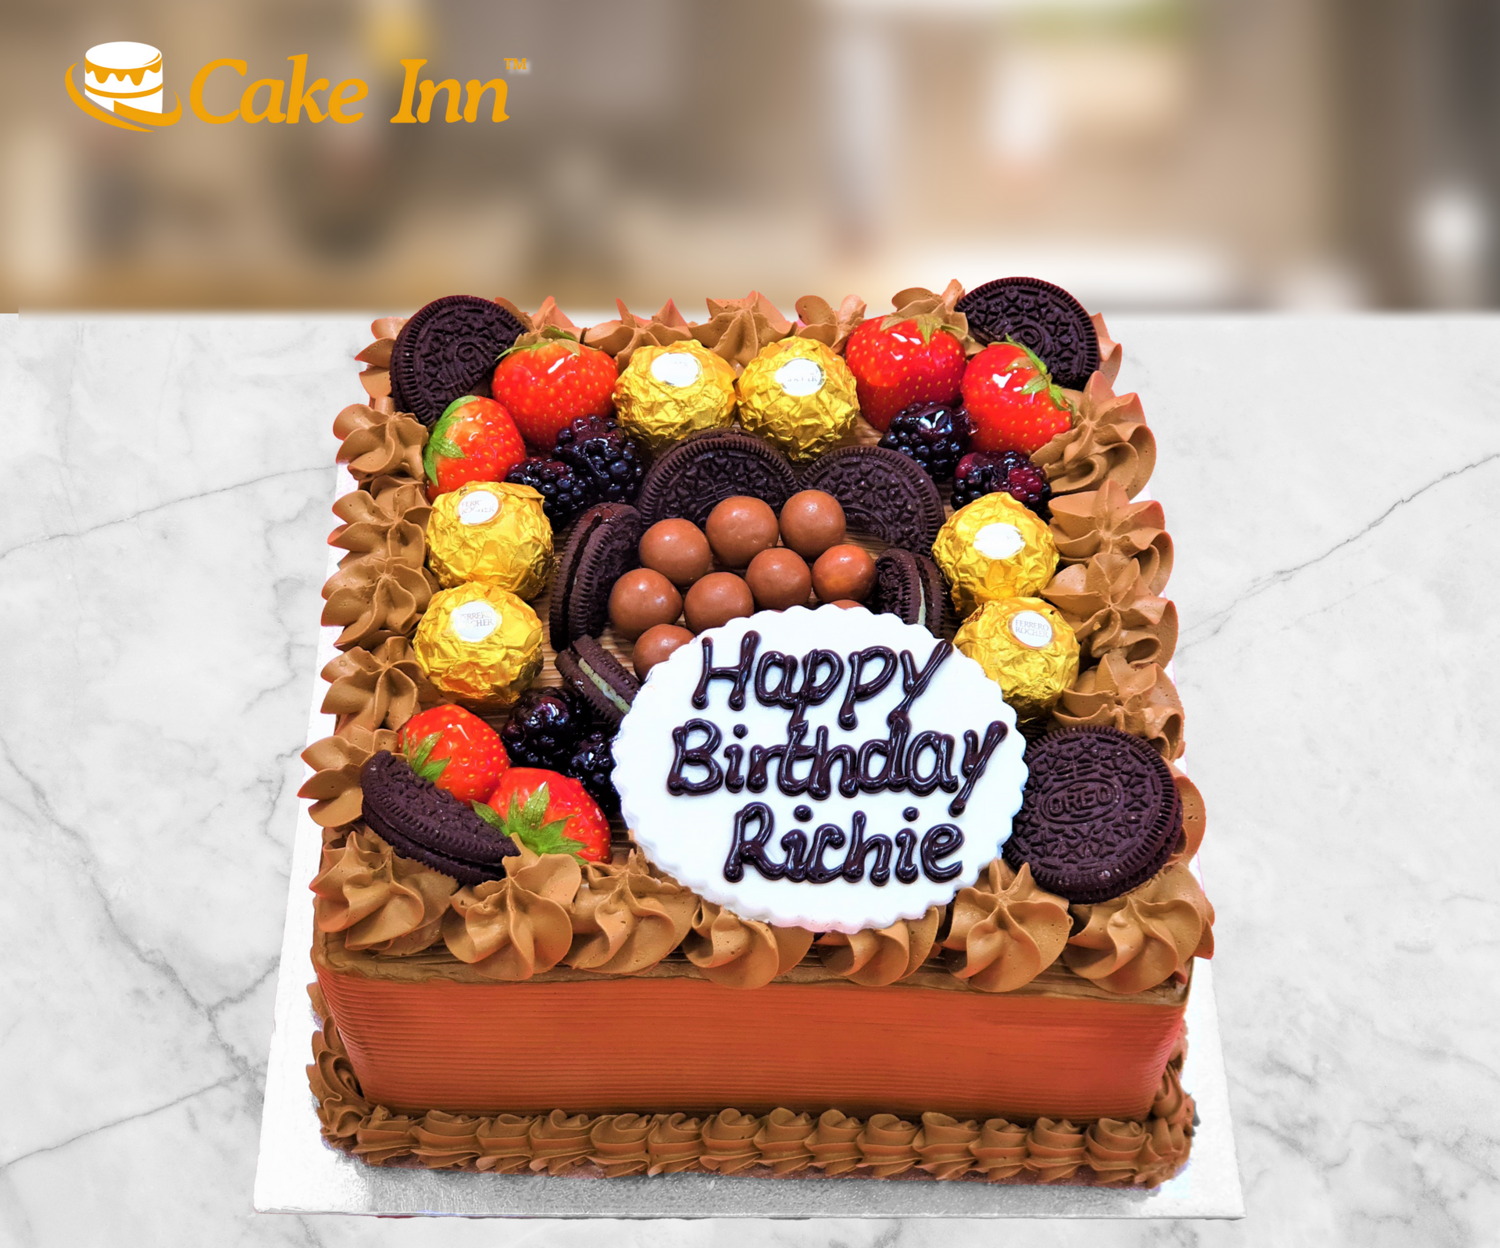 Send Flowers and Cake Combo in Patna | Cake with Flowers in Patna